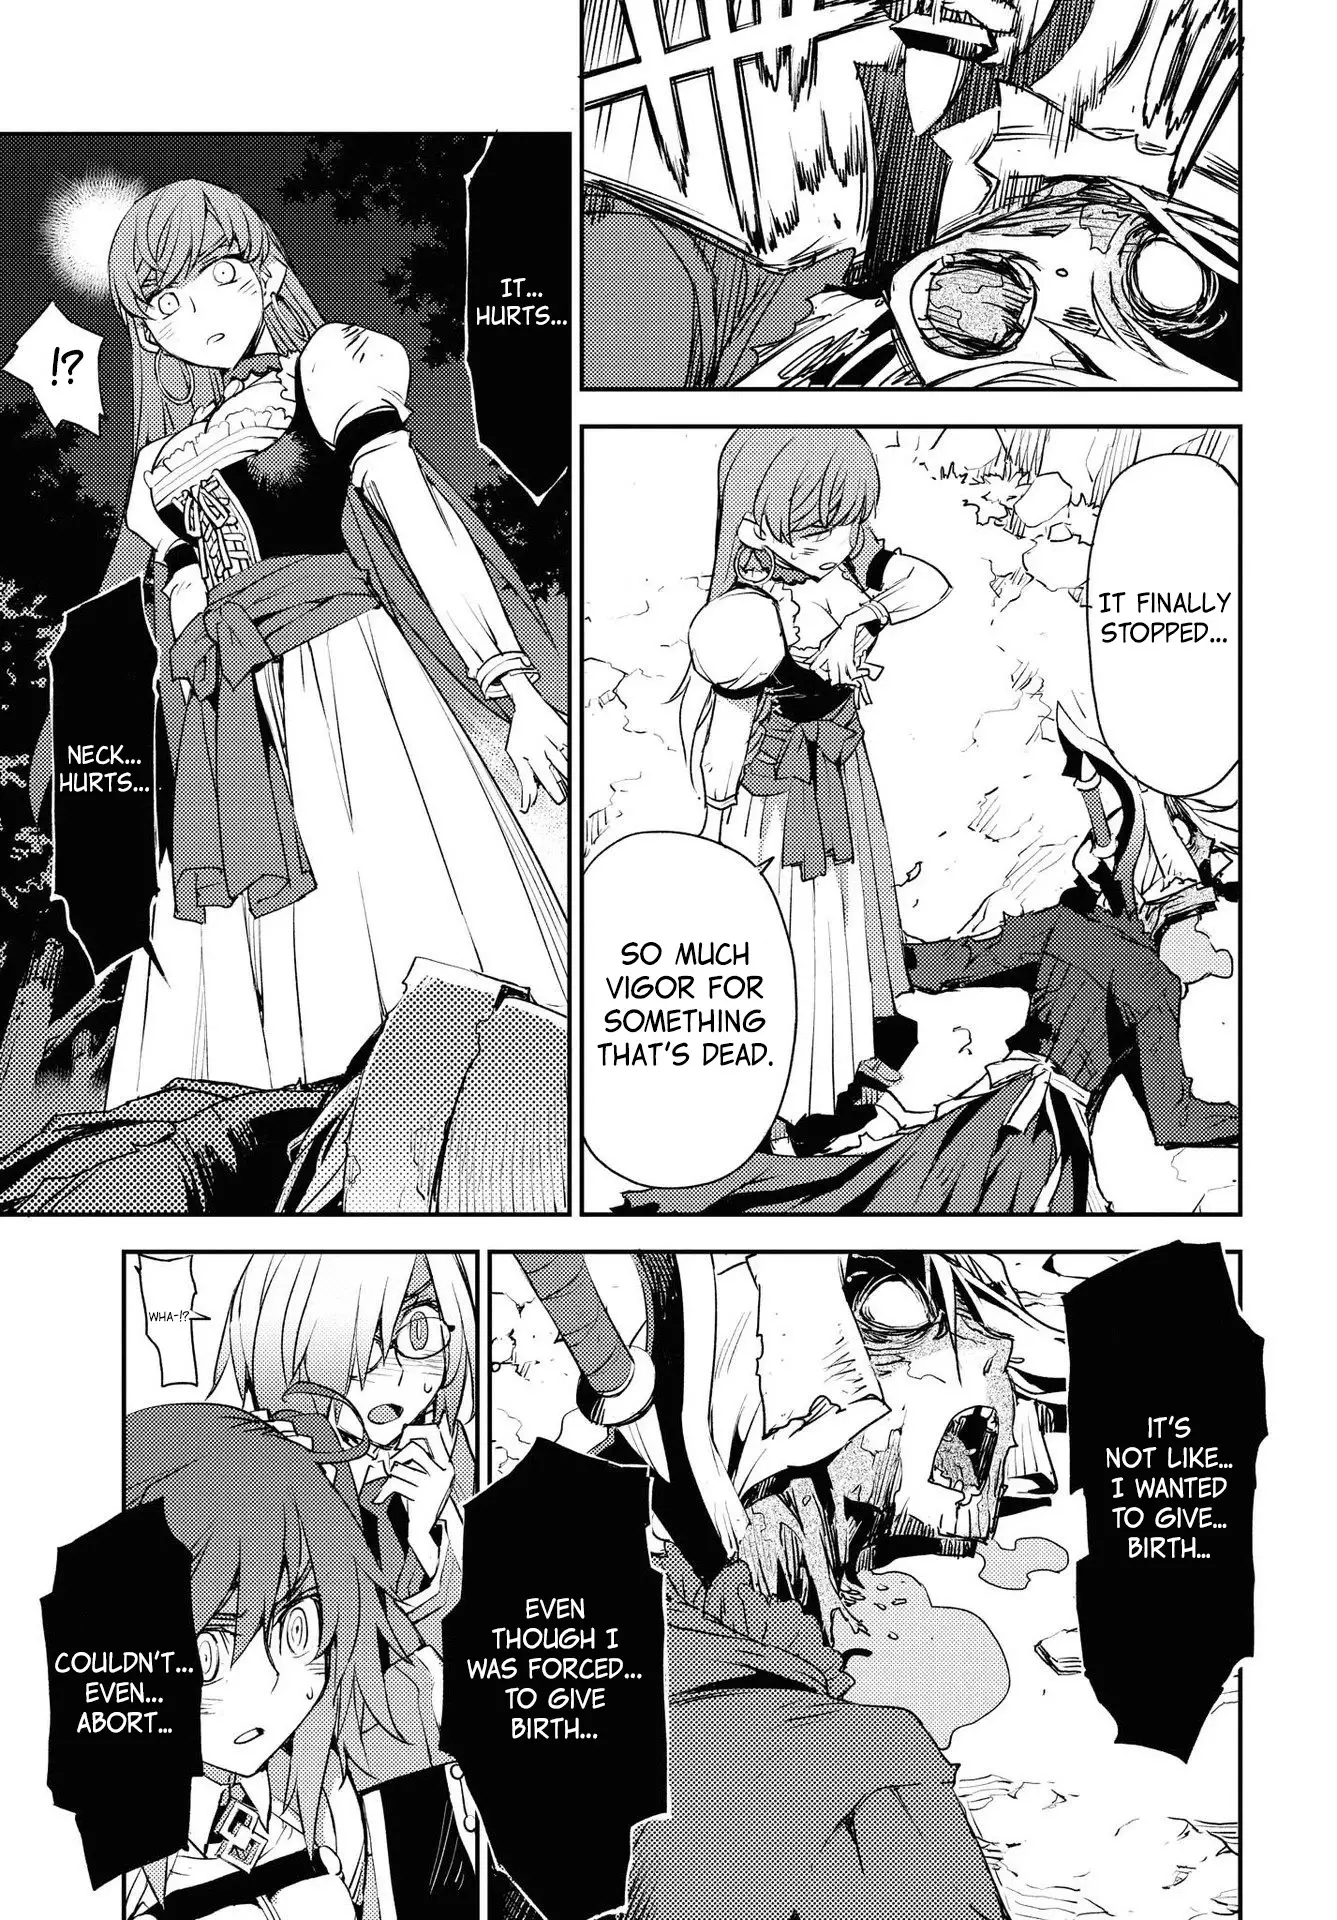 Fate/grand Order: Epic Of Remnant - Subspecies Singularity Iv: Taboo Advent Salem: Salem Of Heresy - 16 page 9